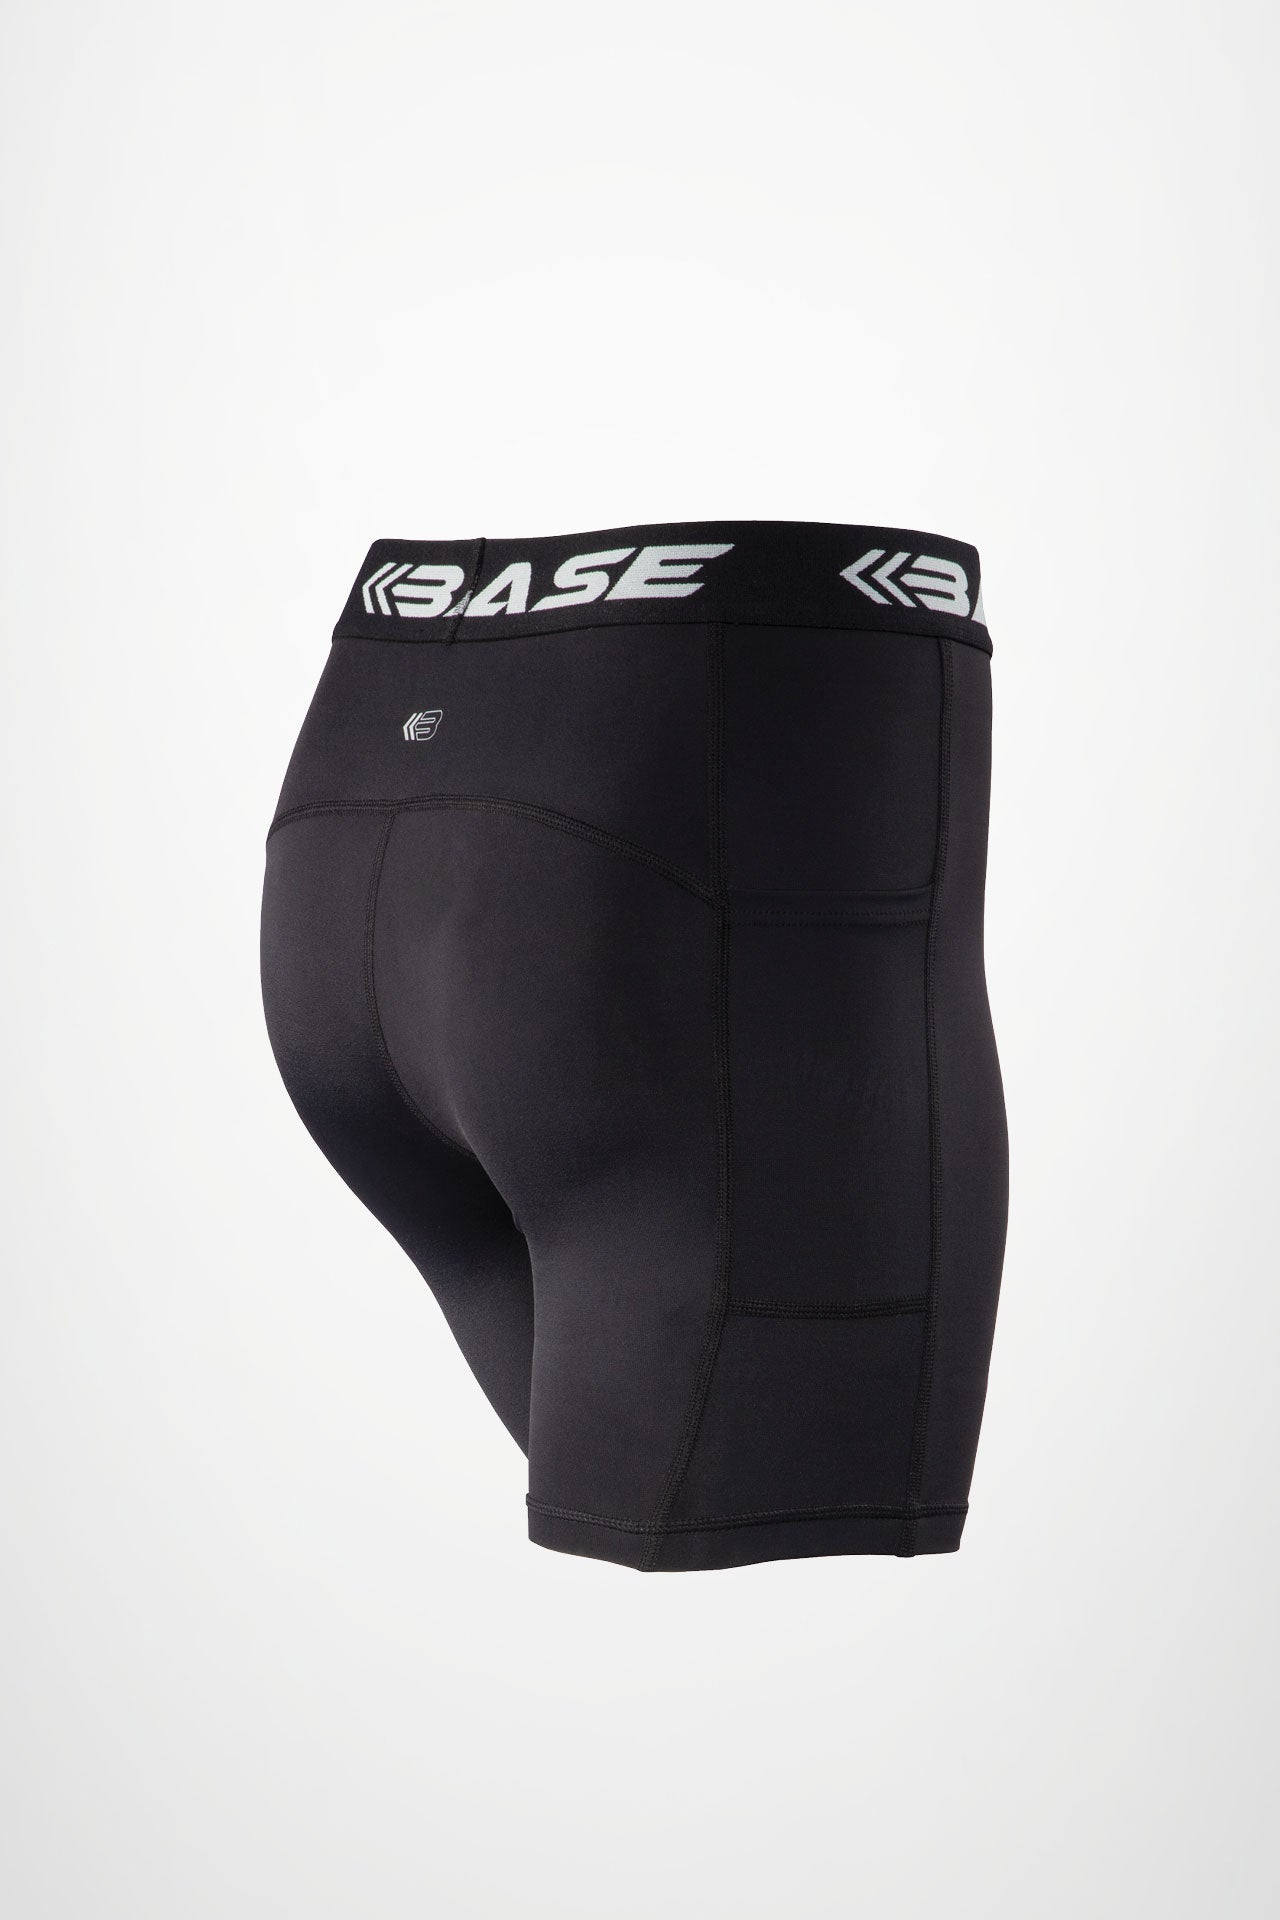 Seamless Compression Shorts Black Pear Shapewear, South Africa